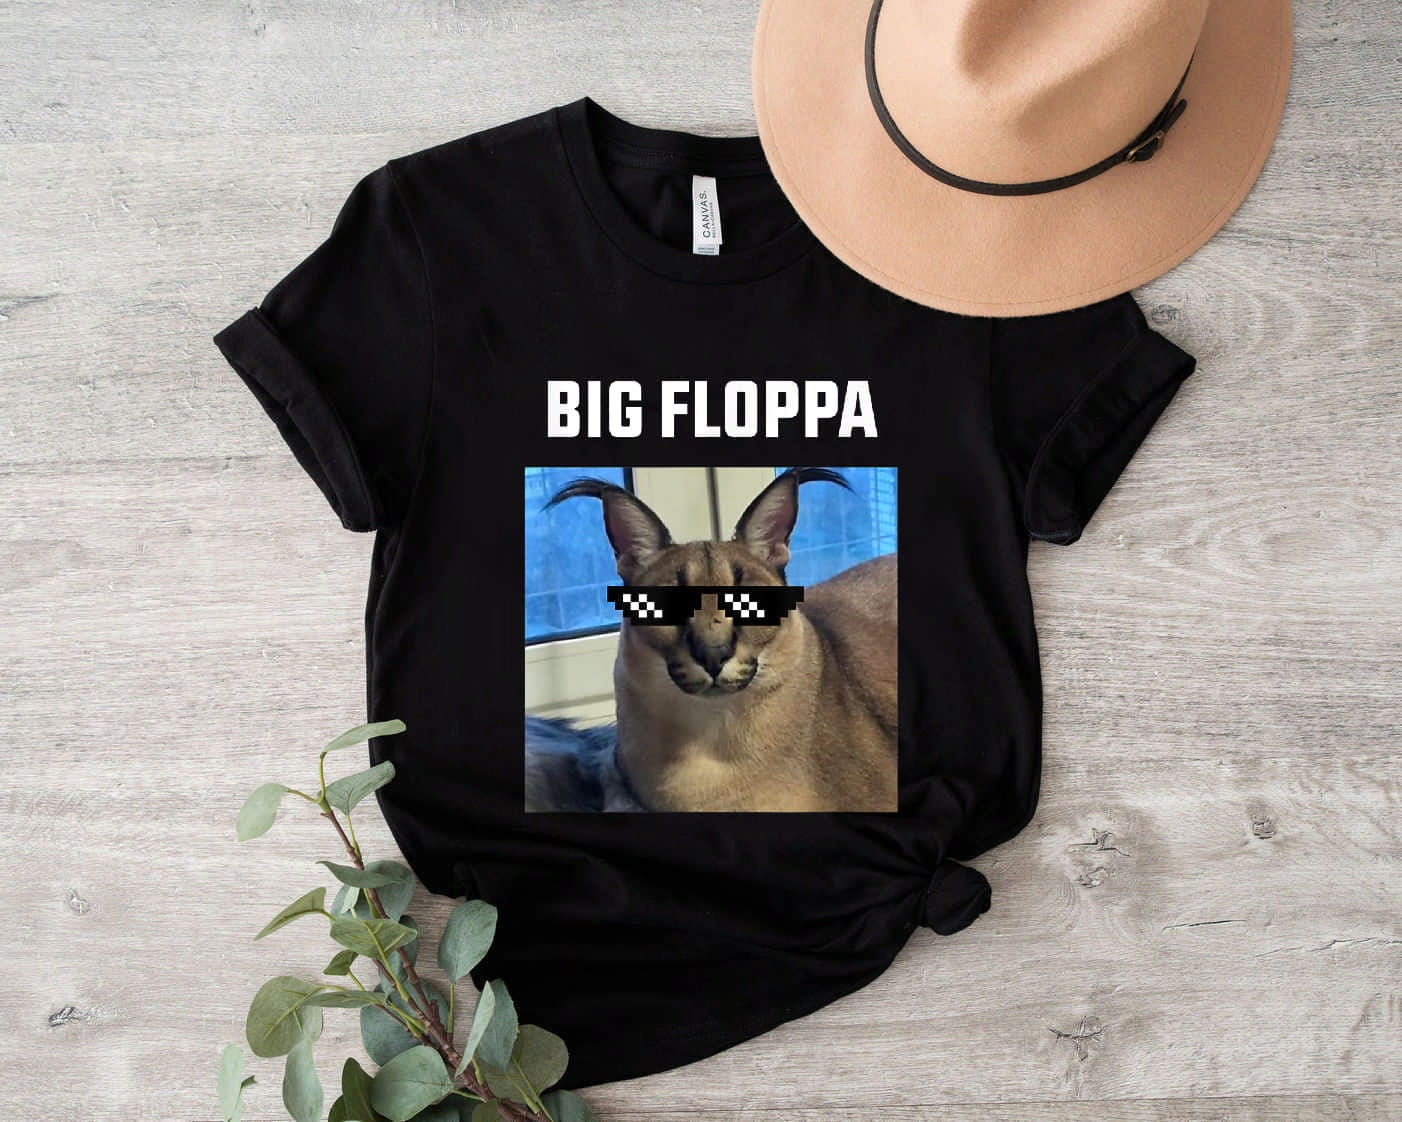 Floppa Photographic Prints for Sale